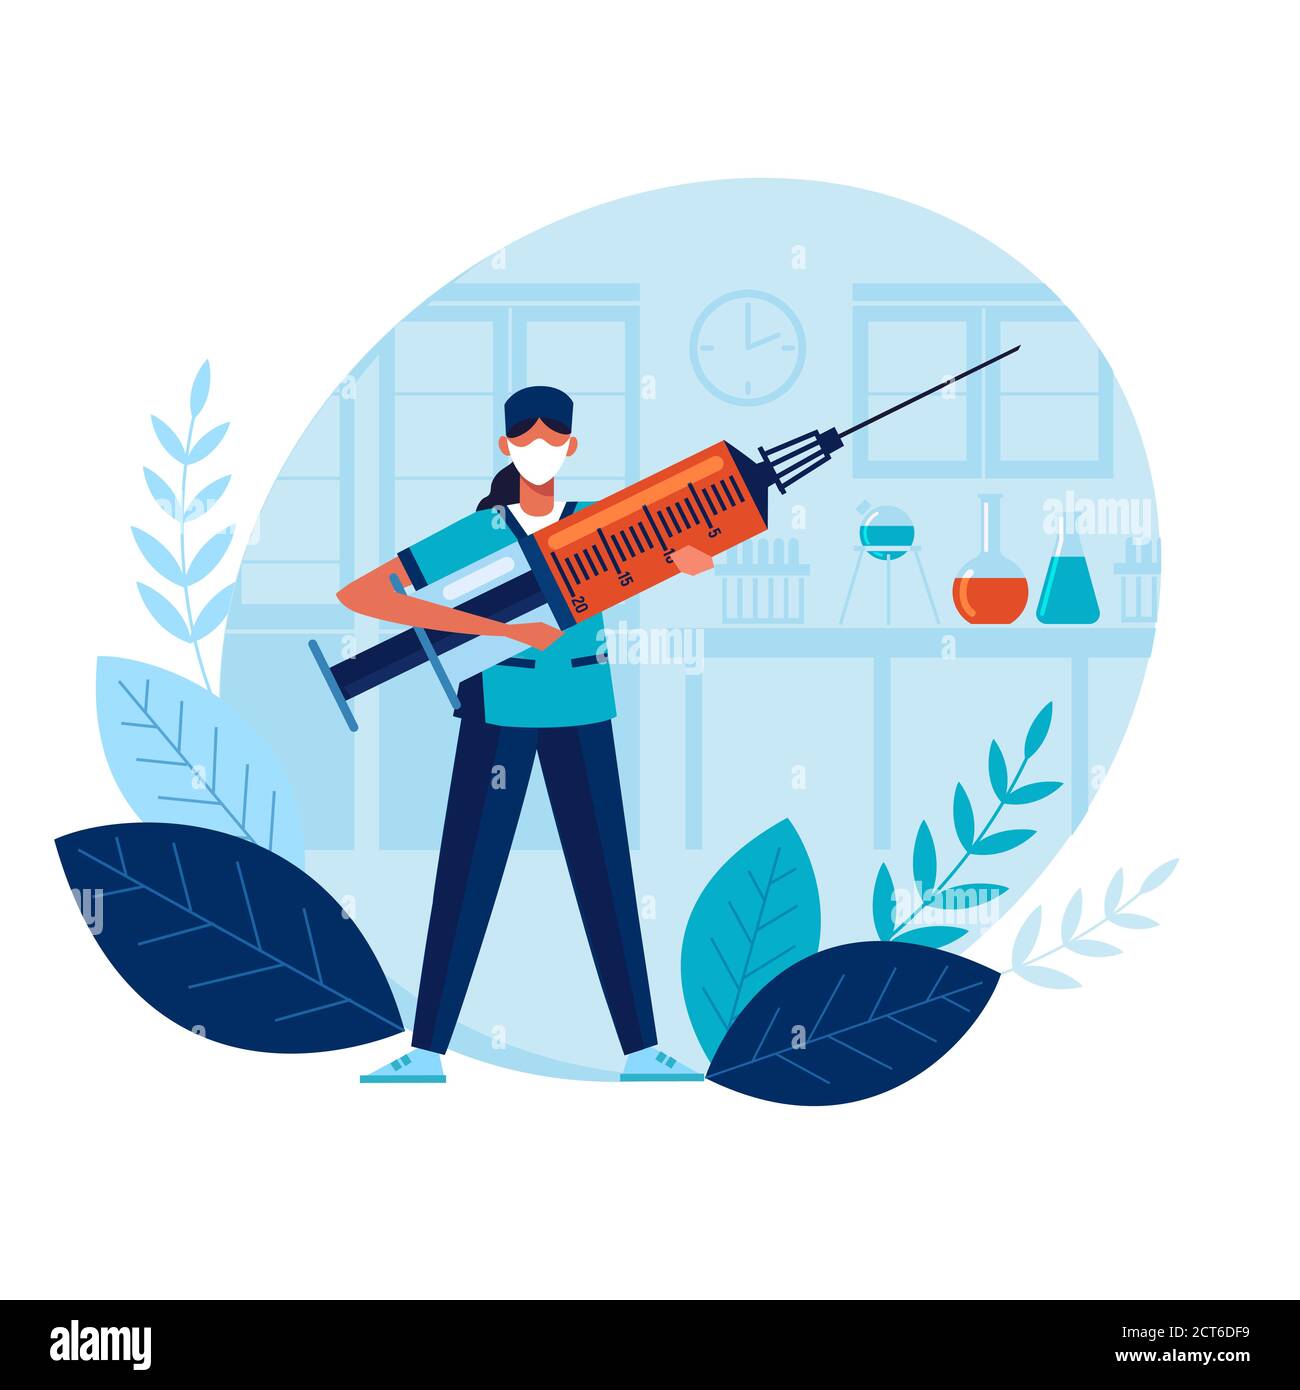 Health concept. Vaccine creation. Doctor prevents epidemic. Vaccination protects public. Laboratory research. Infection prevention concept Stock Vector